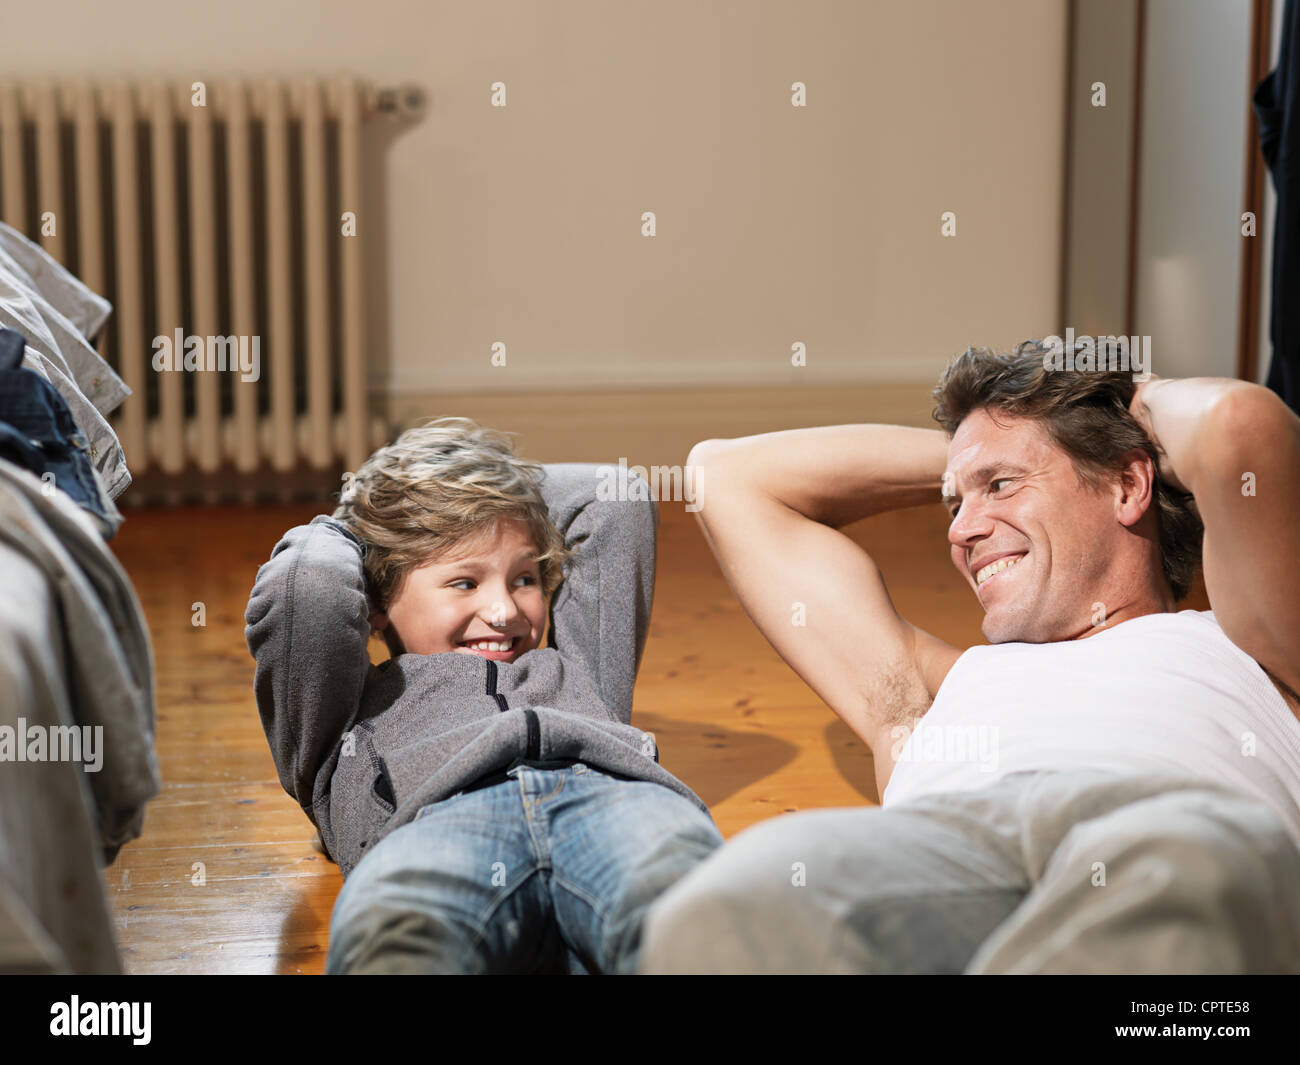 Mature man and son performing exercises in bedroom Stock Photo